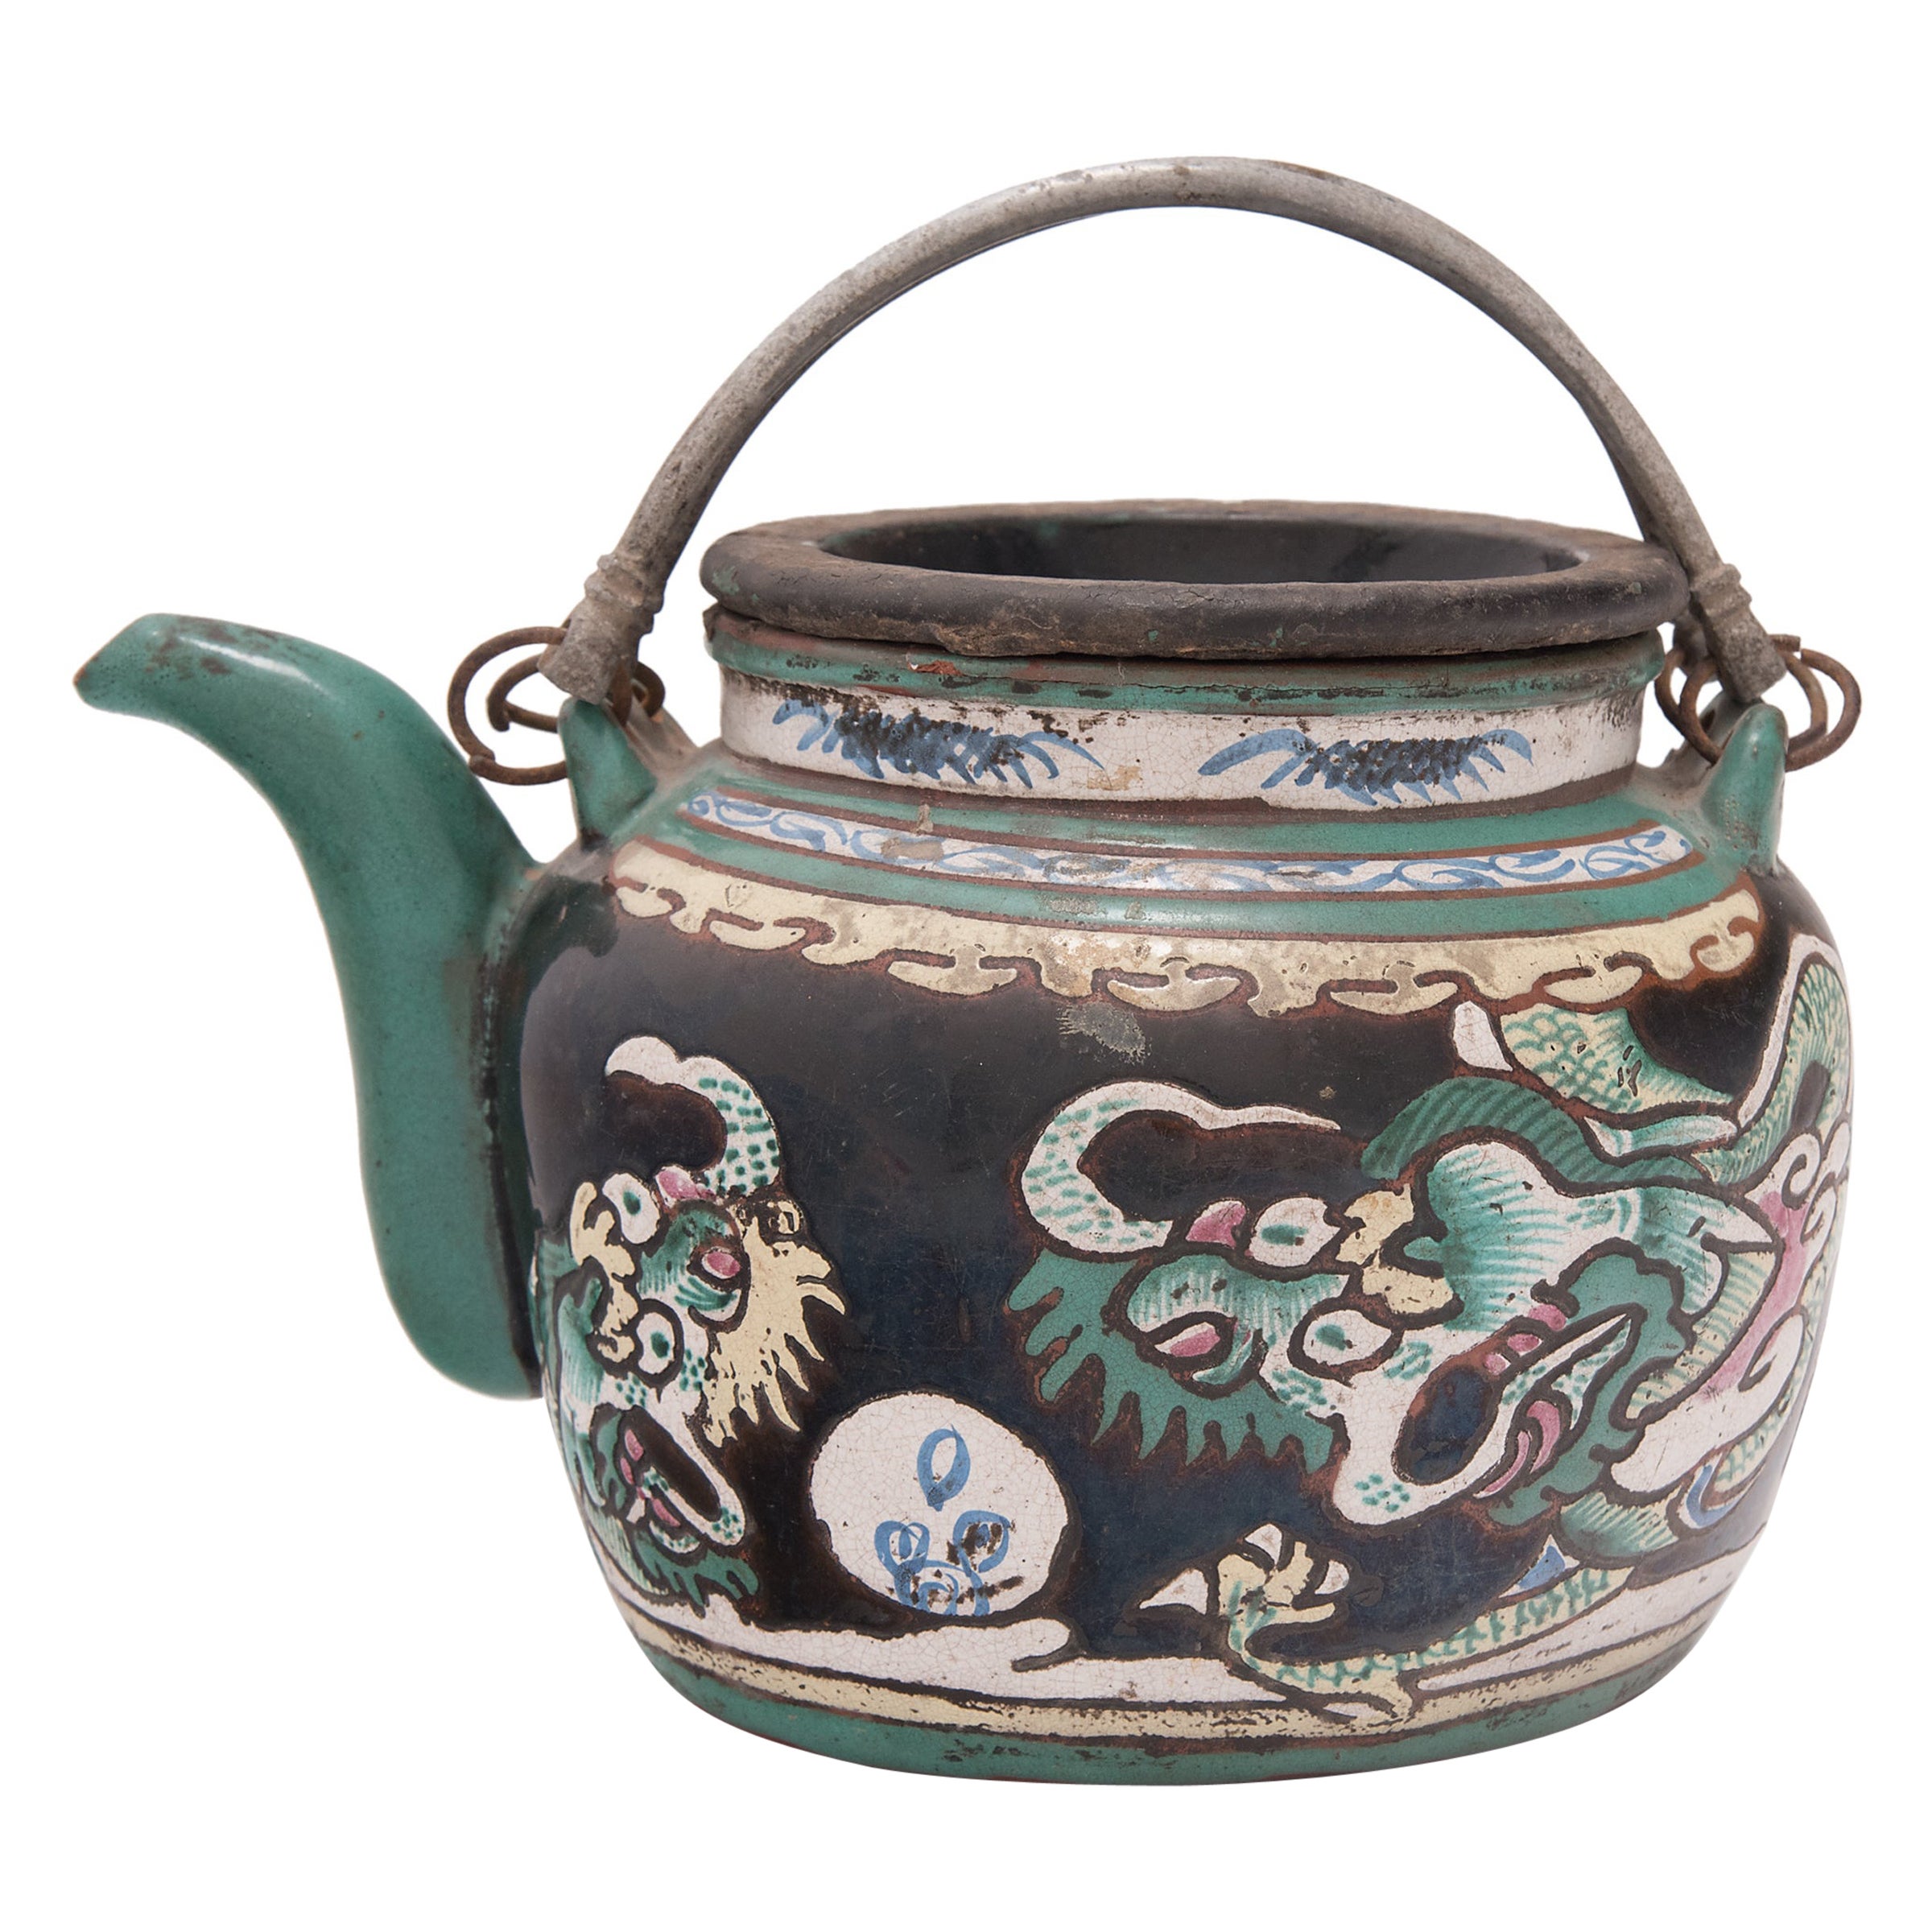 Chinese Enamelware Teapot with Twin Dragons, c. 1900